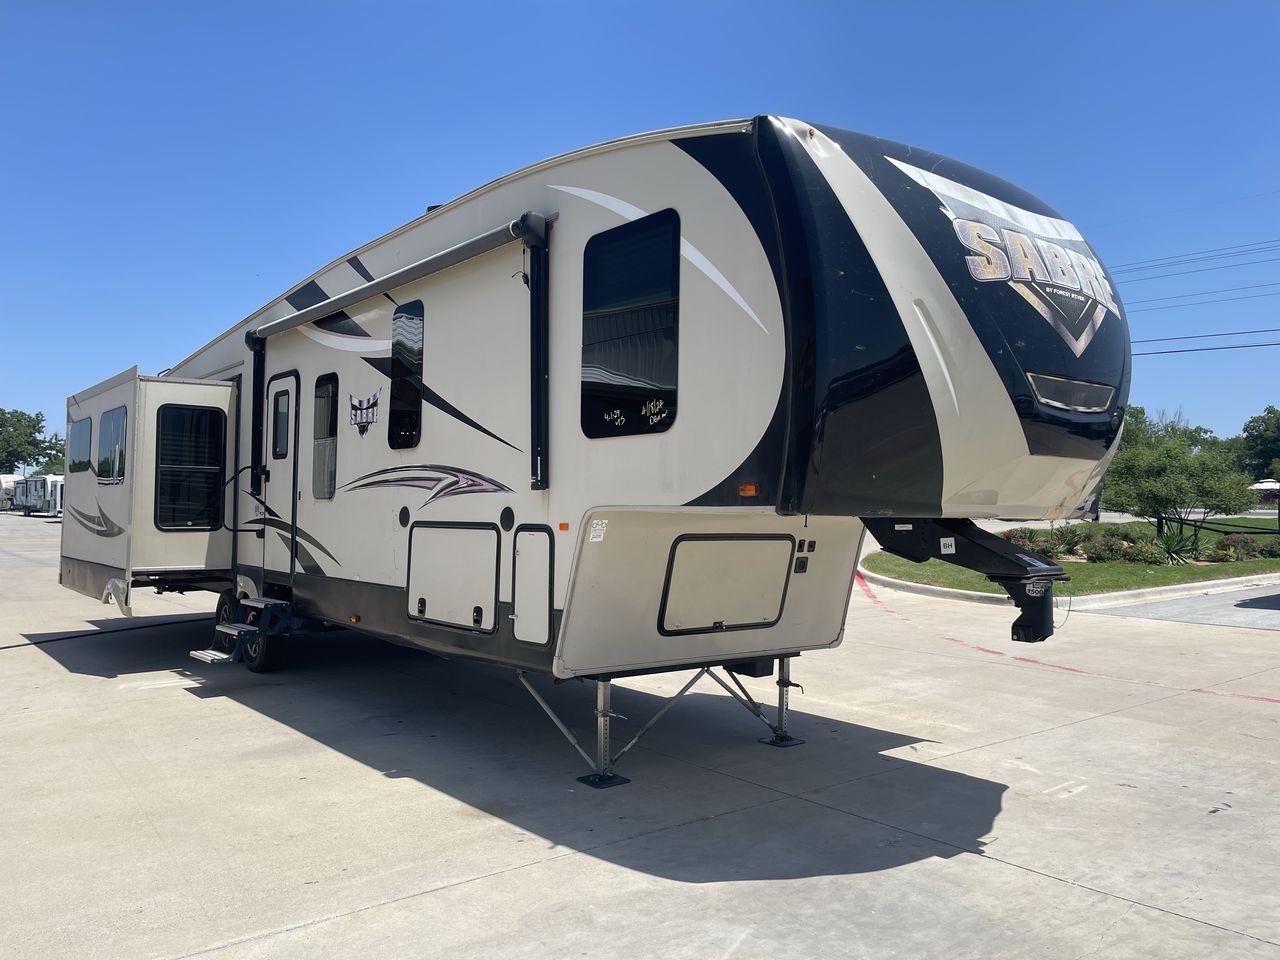 2017 FOREST RIVER SABRE 365MB (4X4FSRN22H3) , Length: 42.42 ft | Dry Weight: 12,994 lbs | Gross Weight: 15,500 lbs | Slides: 4 transmission, located at 4319 N Main Street, Cleburne, TX, 76033, (817) 221-0660, 32.435829, -97.384178 - The 2017 Forest River Sabre 365MB is a roomy fifth wheel that is meant to make camping trips more comfortable. With its spacious layout and thoughtful features, this RV provides a luxury home away from home. The unit measures 42.42 feet in length and weighs 12,994 lbs. dry, offers enough space for r - Photo #23